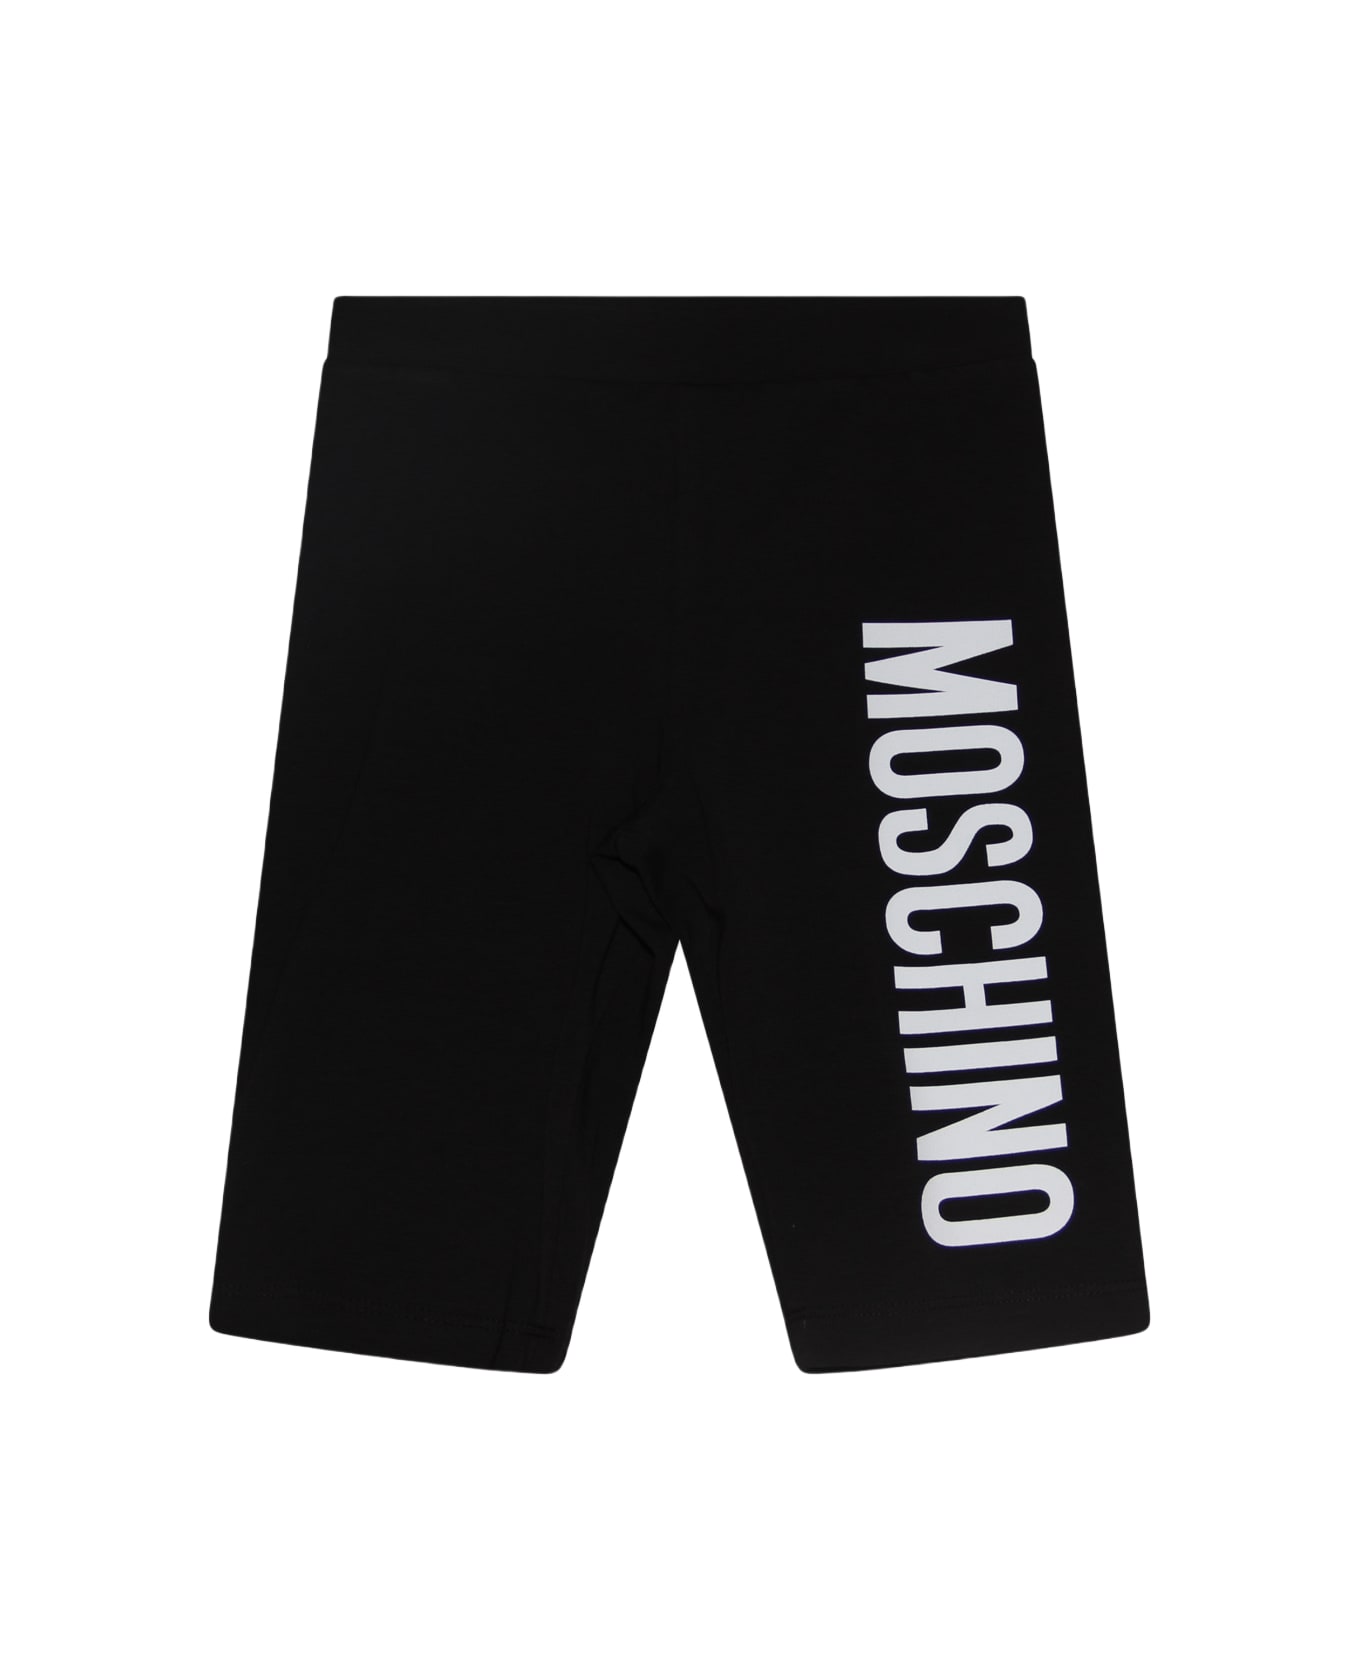 Moschino Black And White Cotton Blend Shorts - Black ボトムス